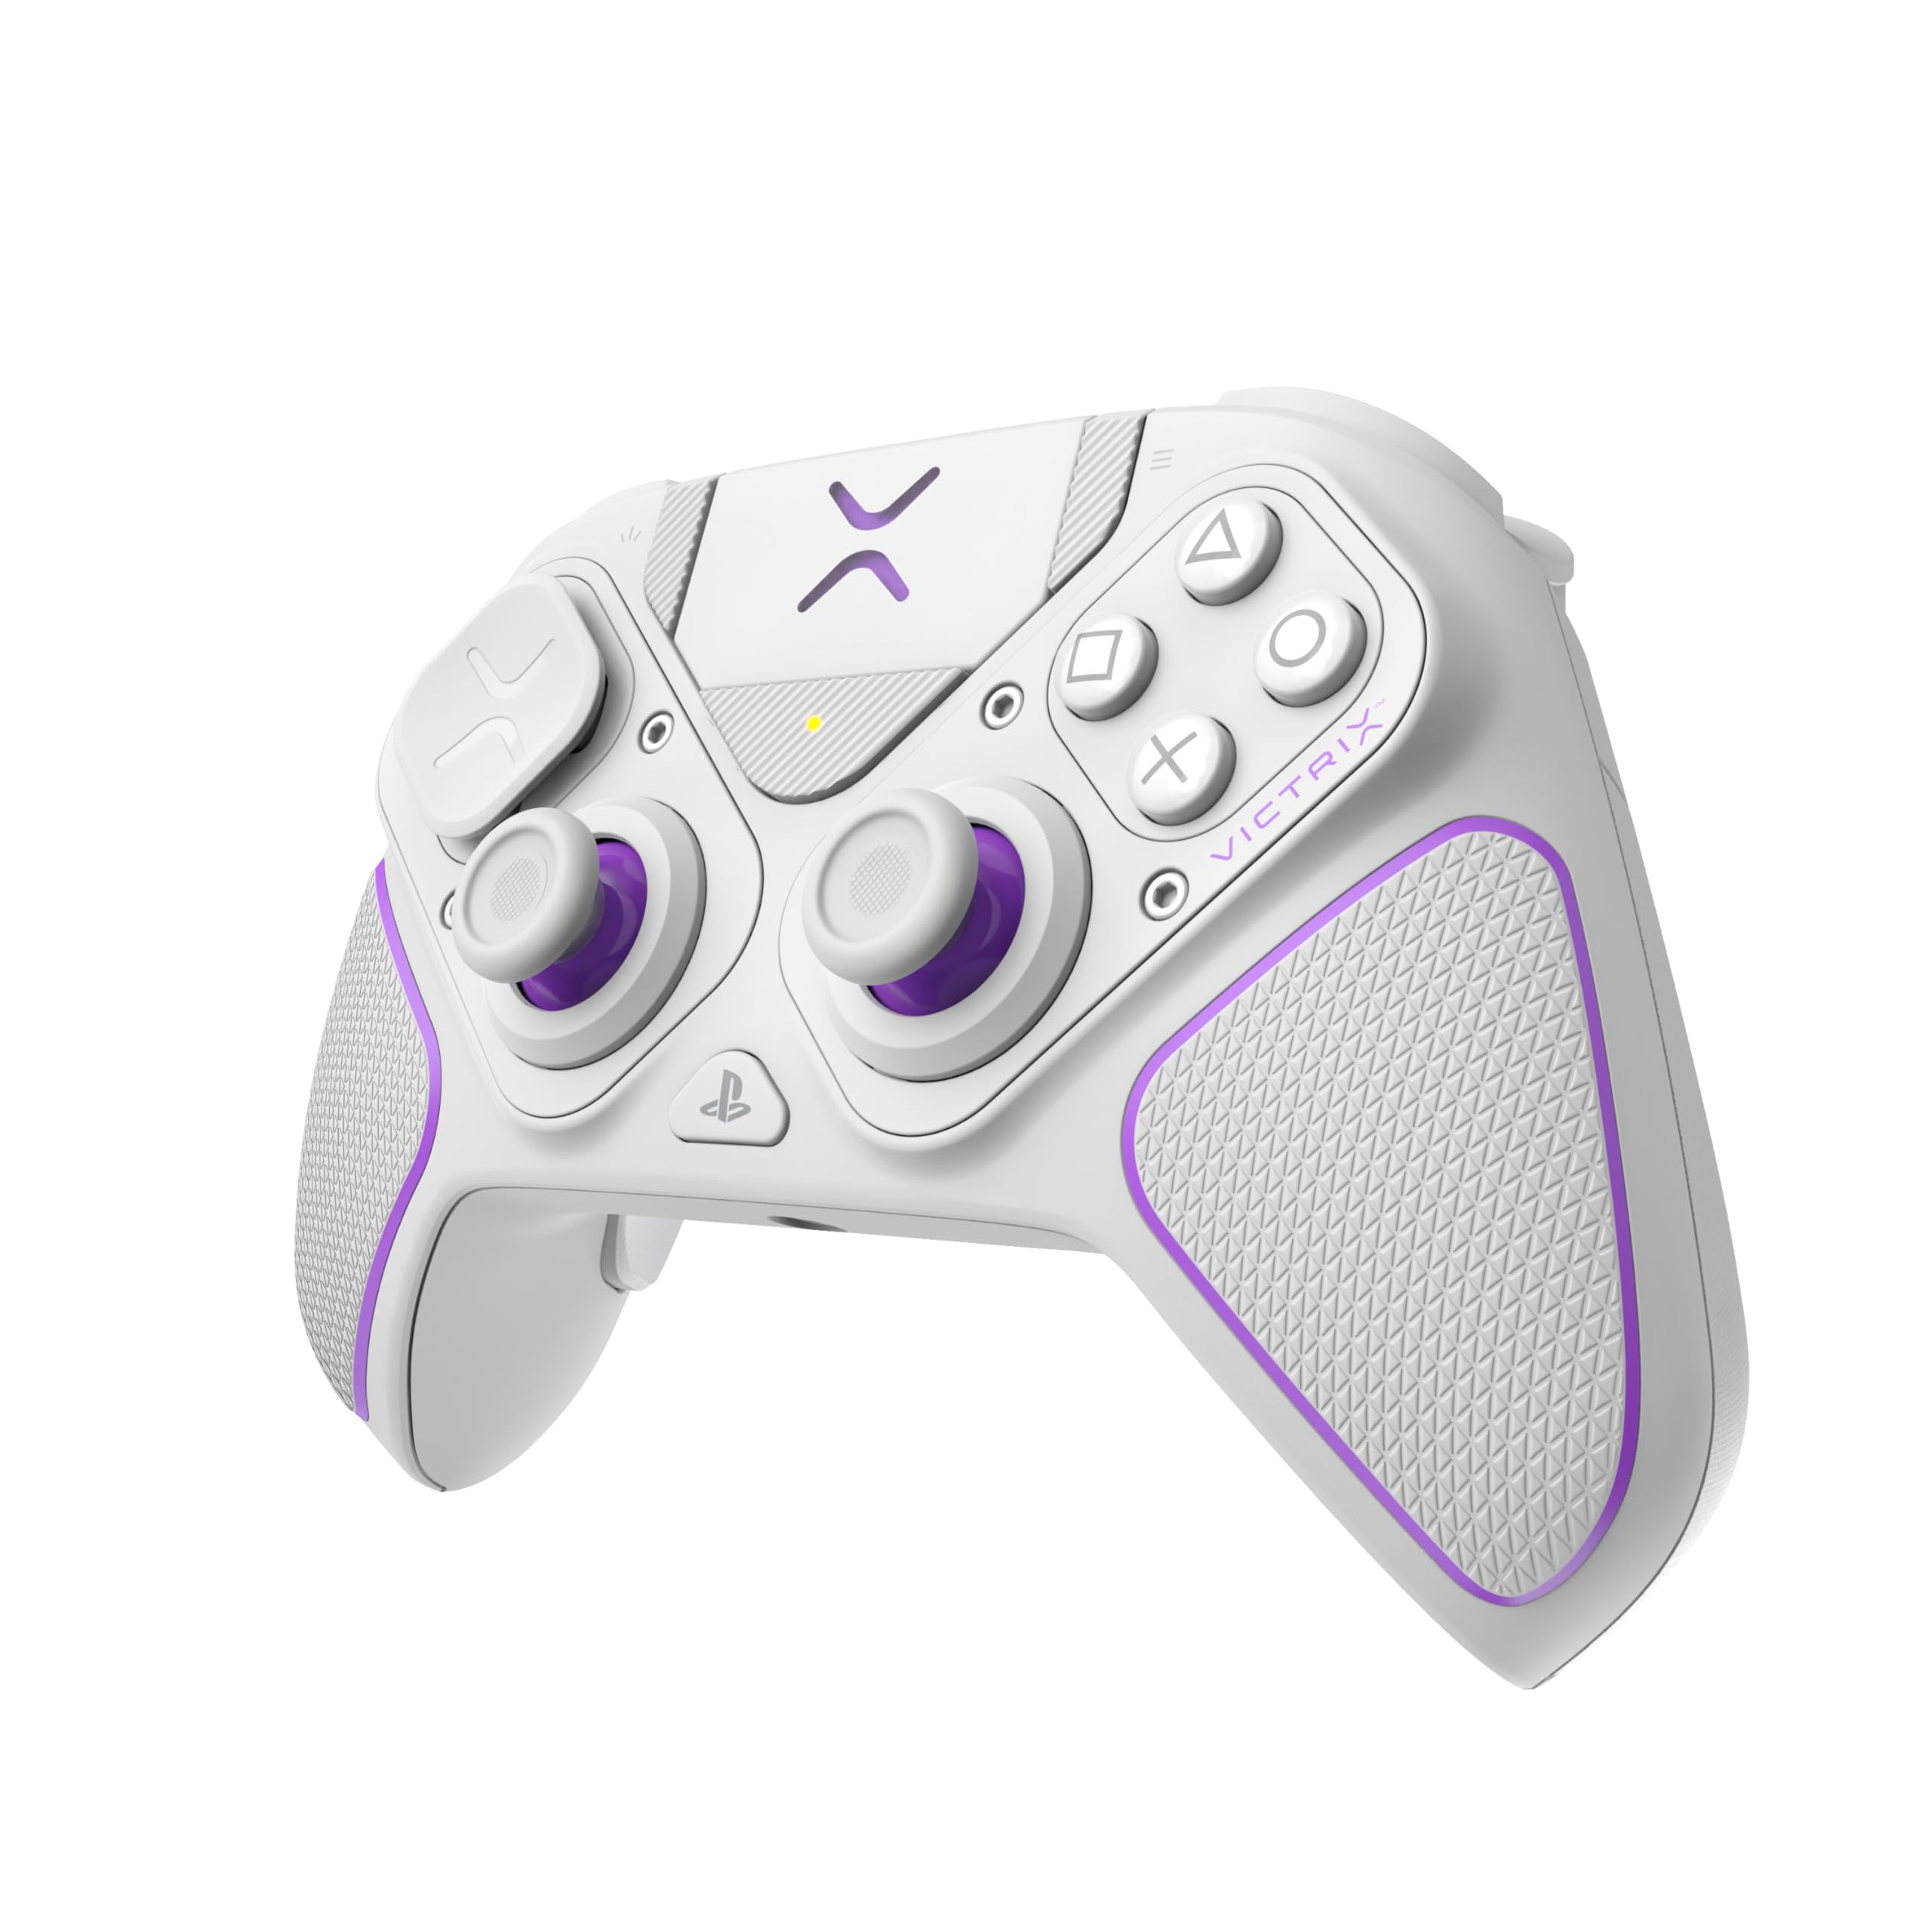 PDP Victrix Pro BFG Wireless Gaming Controller for Playstation 5 / PS5, PS4, PC, Modular Gamepad, Remappable Buttons, Customizable Triggers/Paddles/D-Pad, PC App White